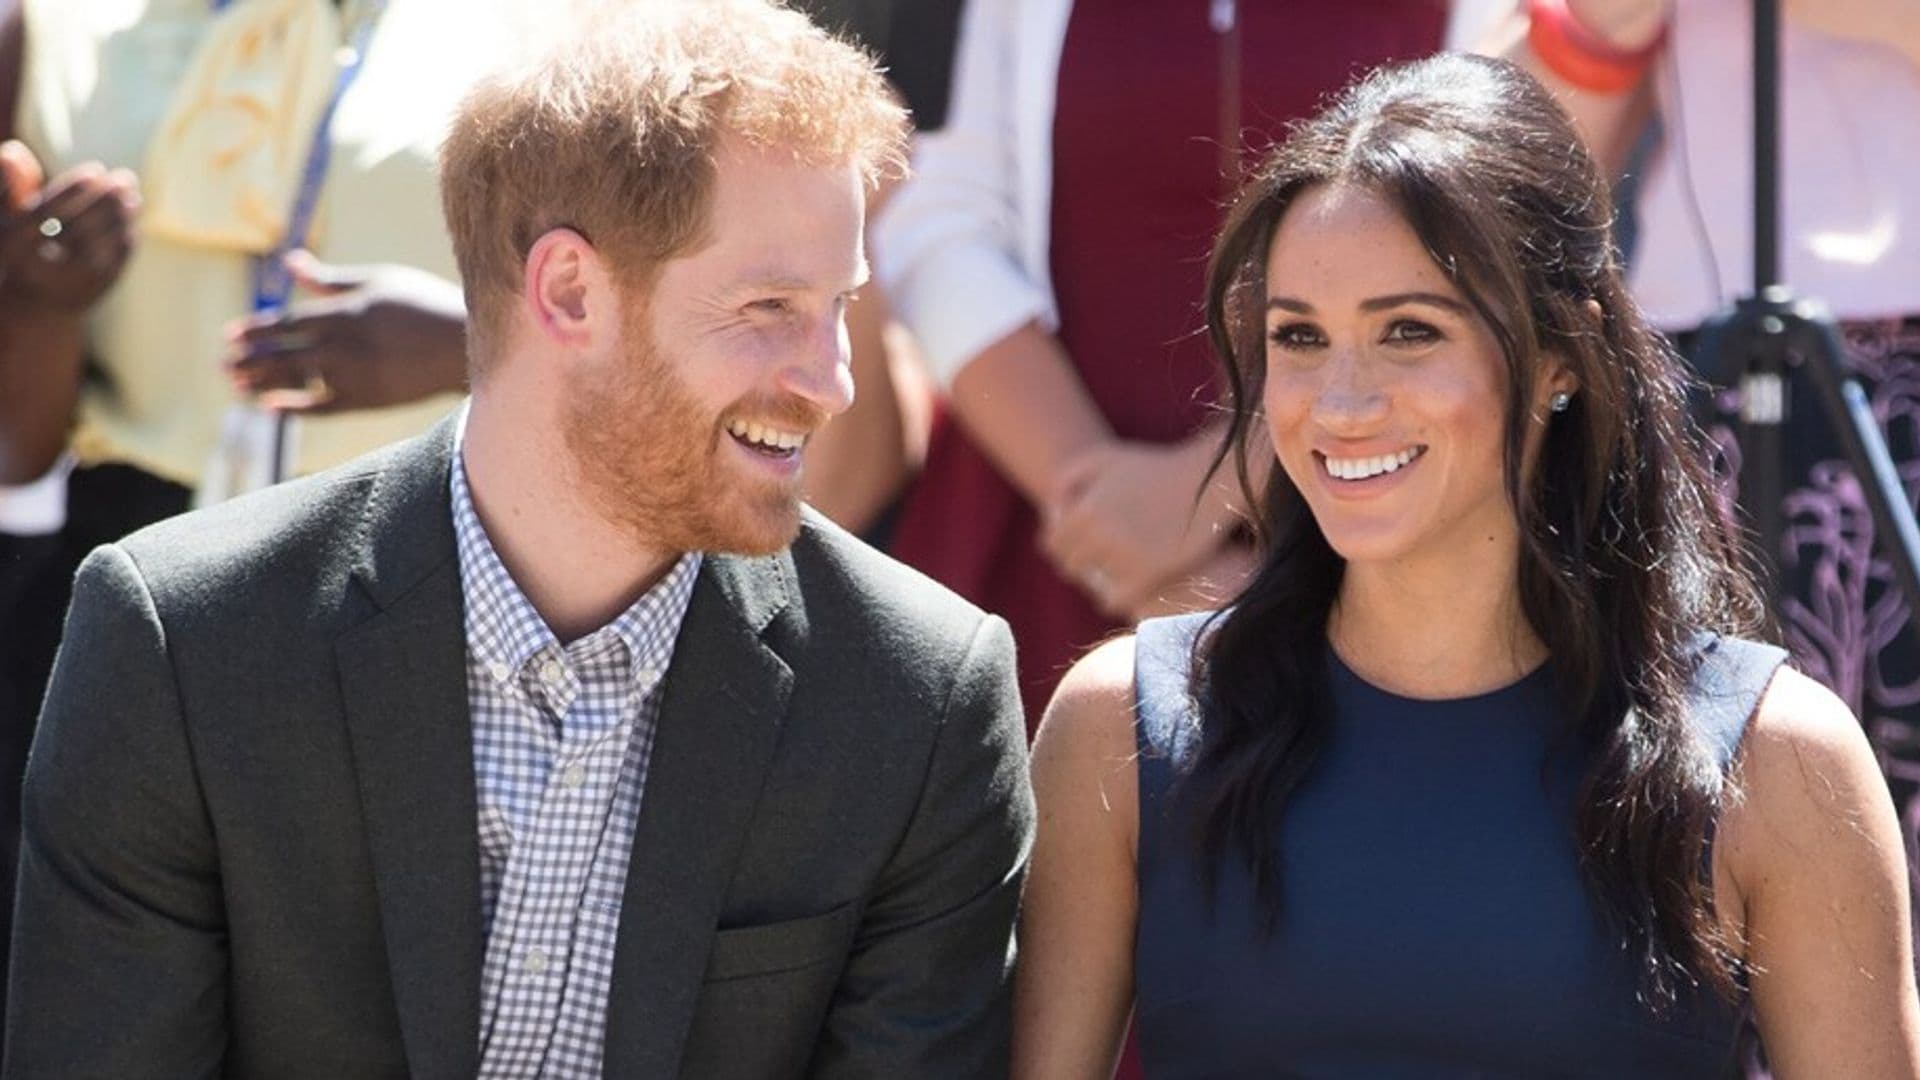 5 things we learned about Meghan Markle from the CBS special 'Meghan and Harry Plus One'